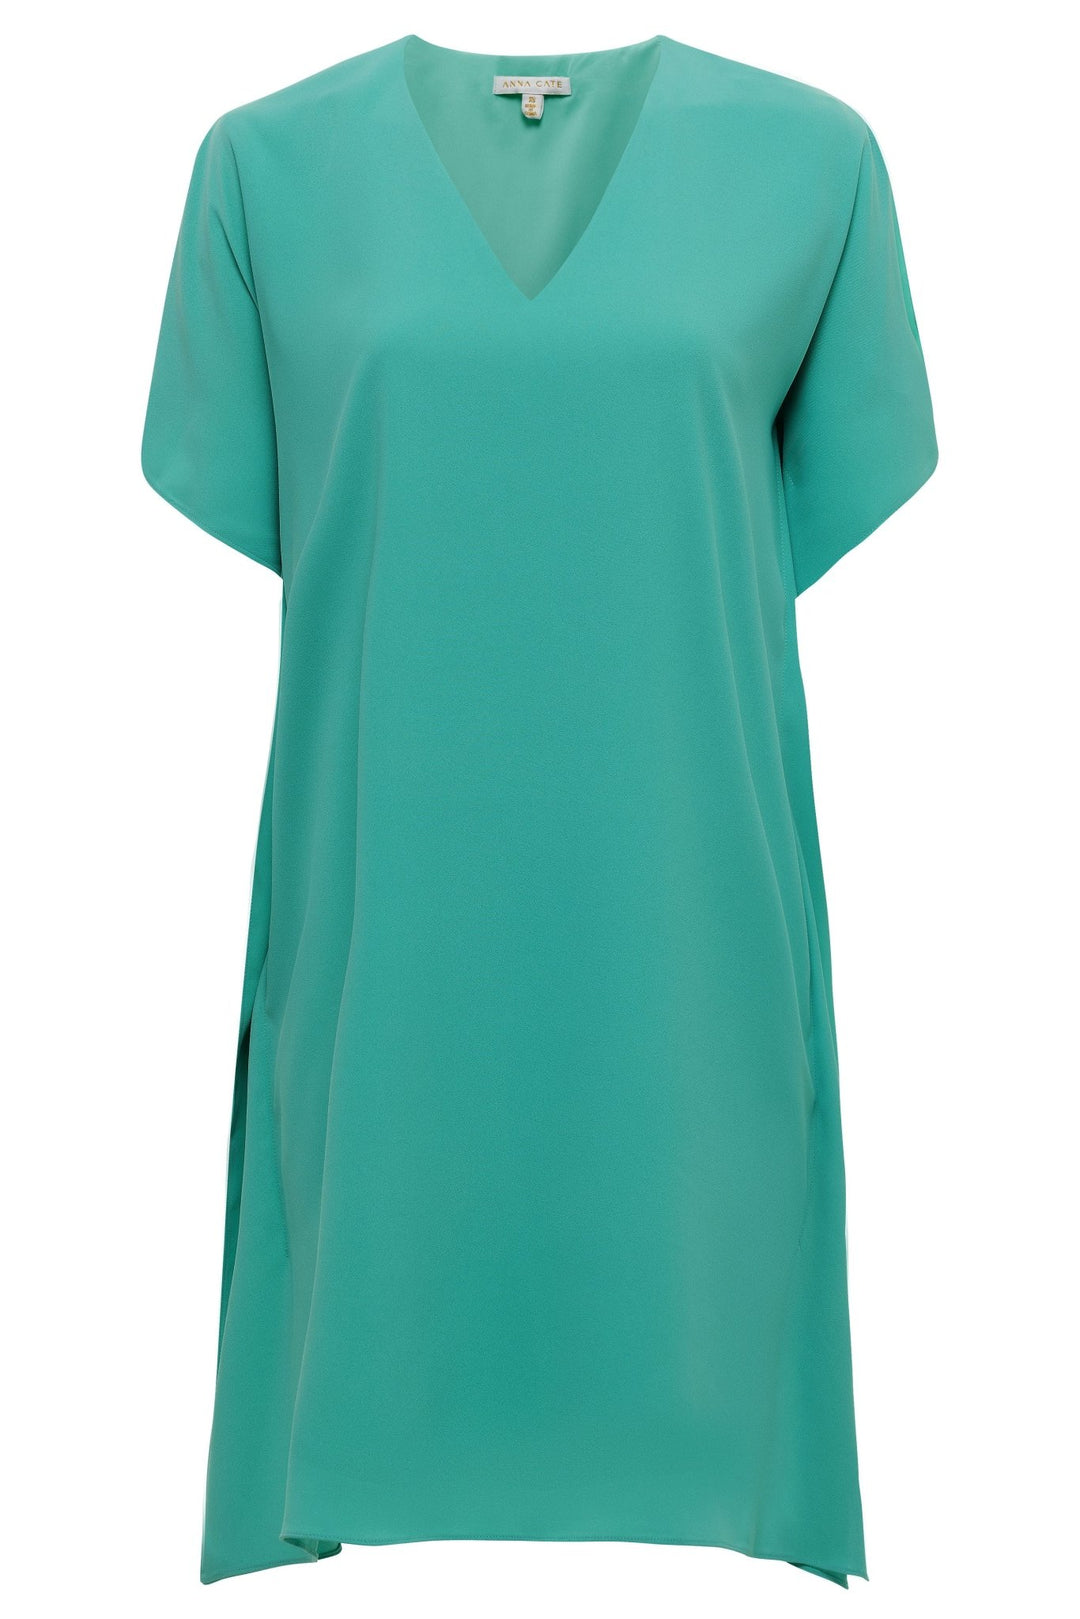 Anna Cate - "New" Eva VNeck Flutter Sleeve Dress: Turquoise - Shorely Chic Boutique